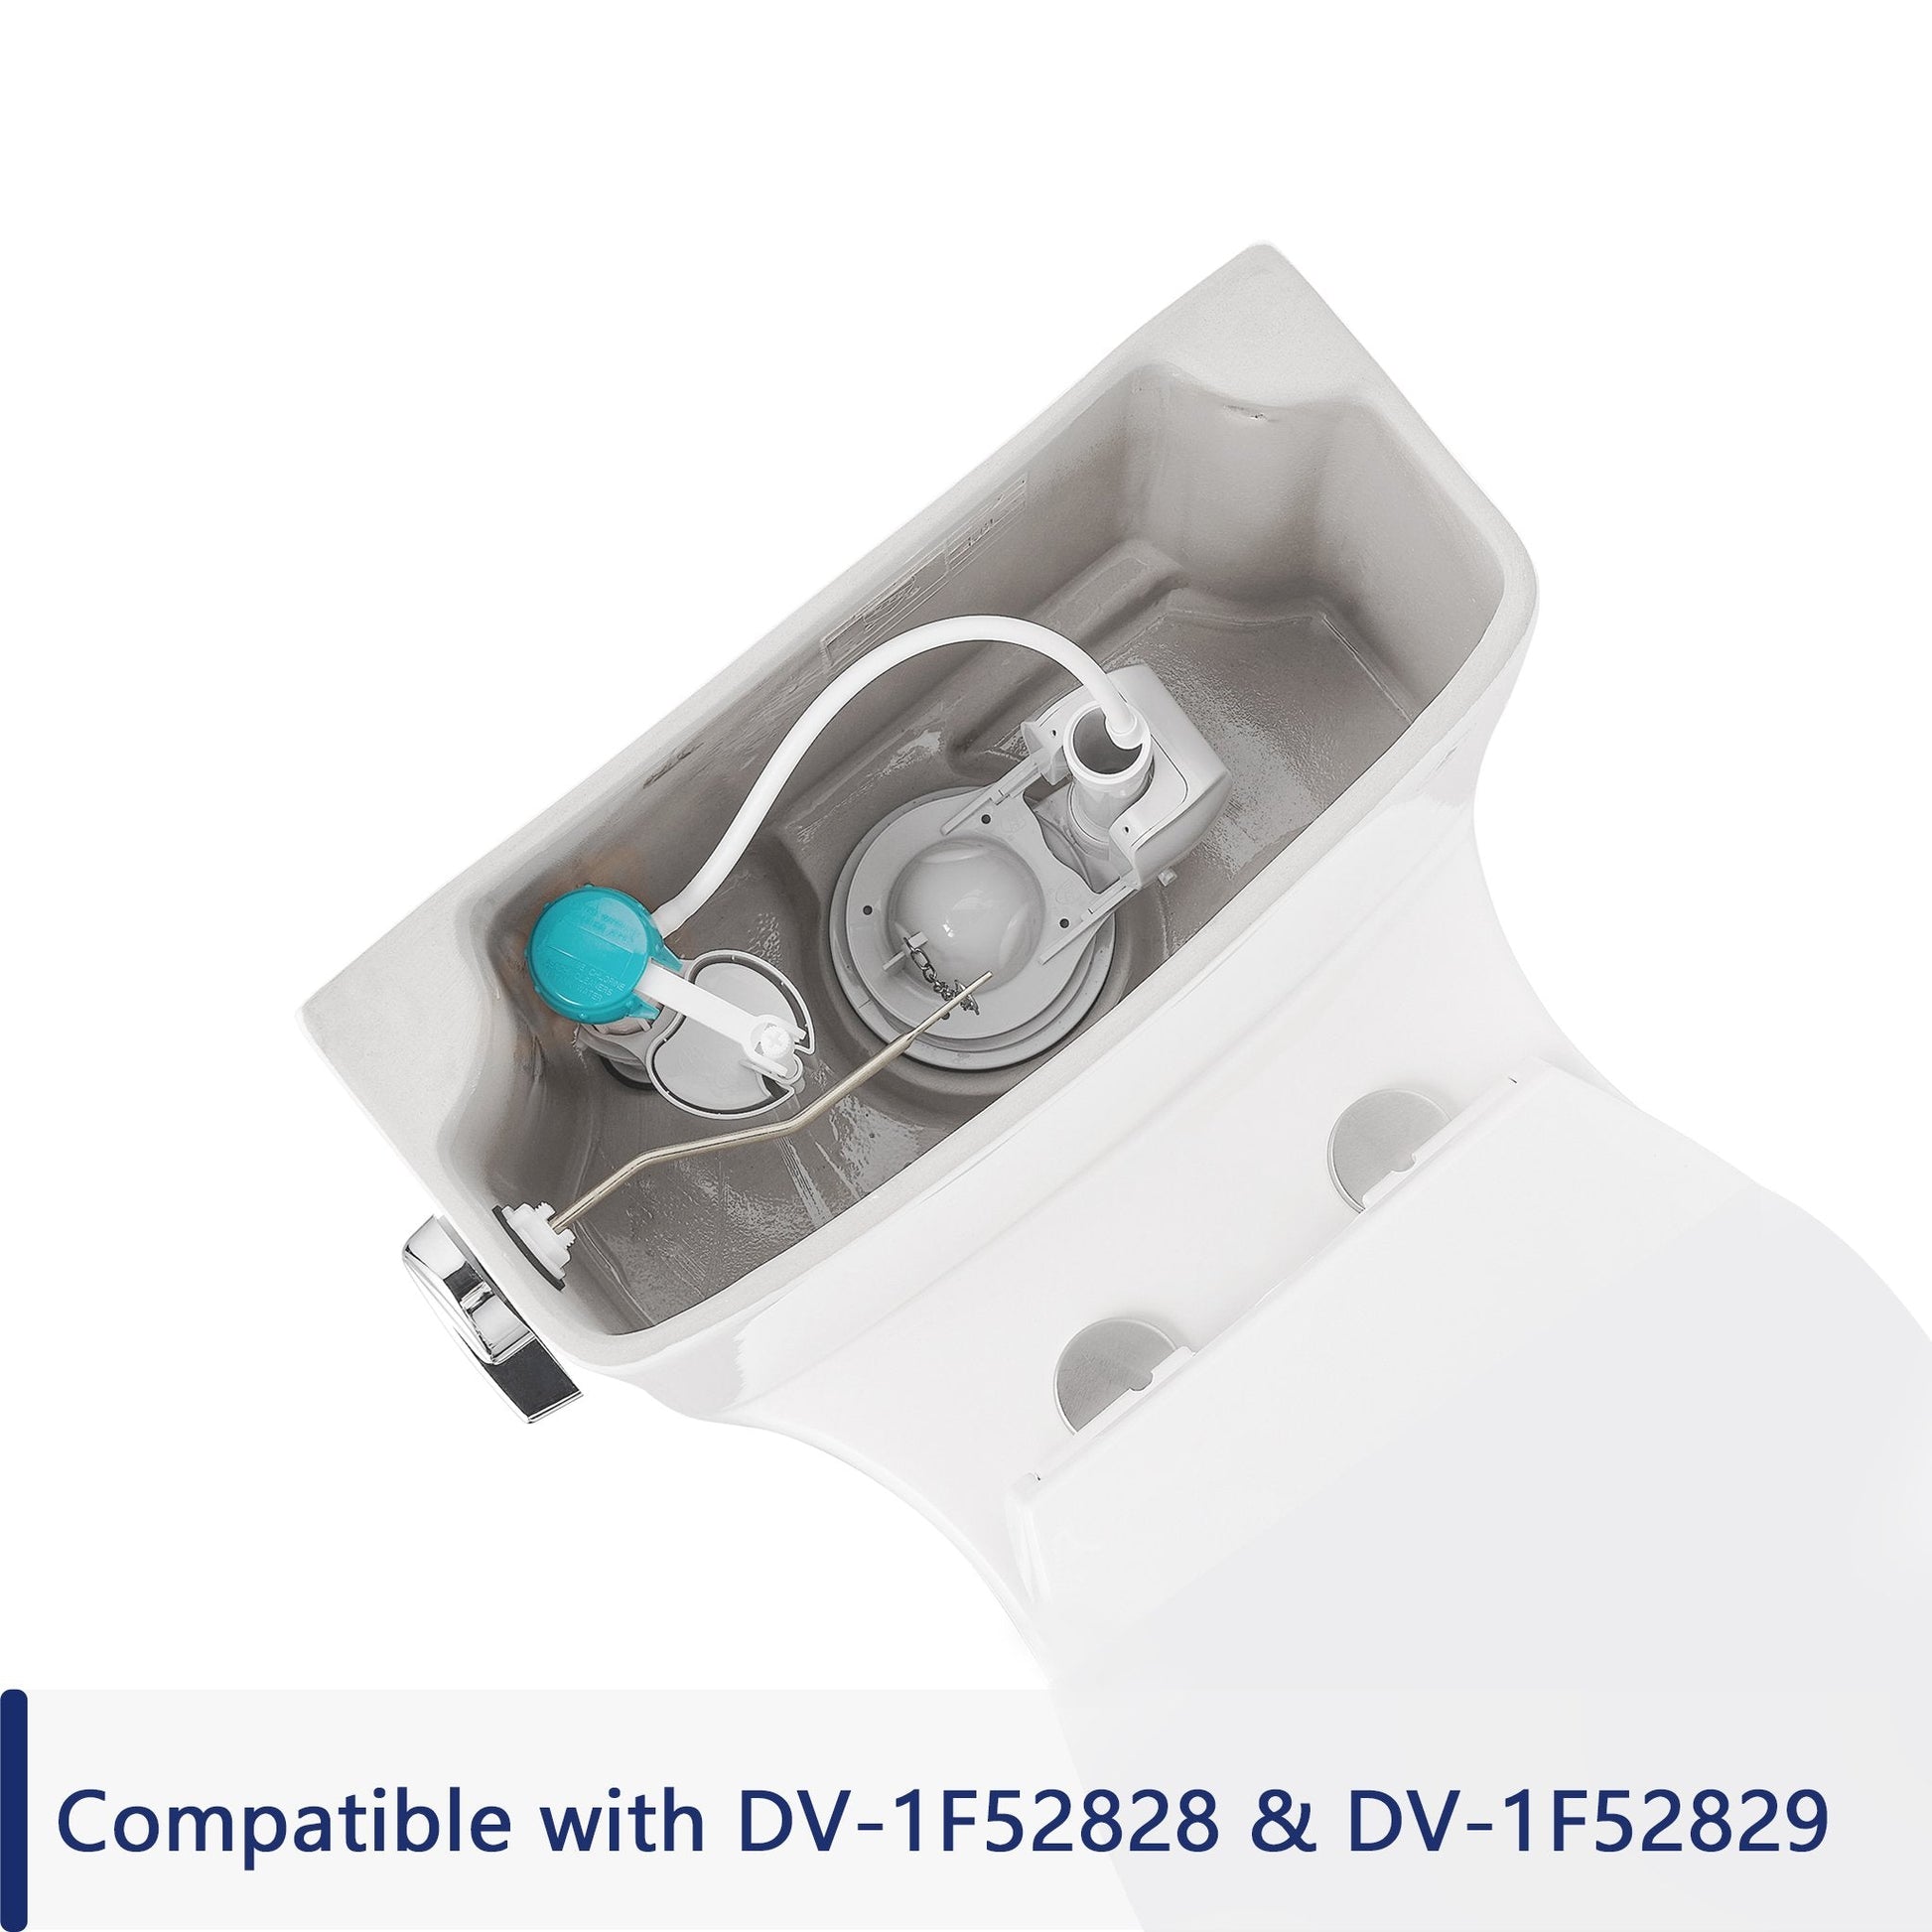 DeerValley Fill Valve (Fit with DV-1F52828 and DV-1F52828)